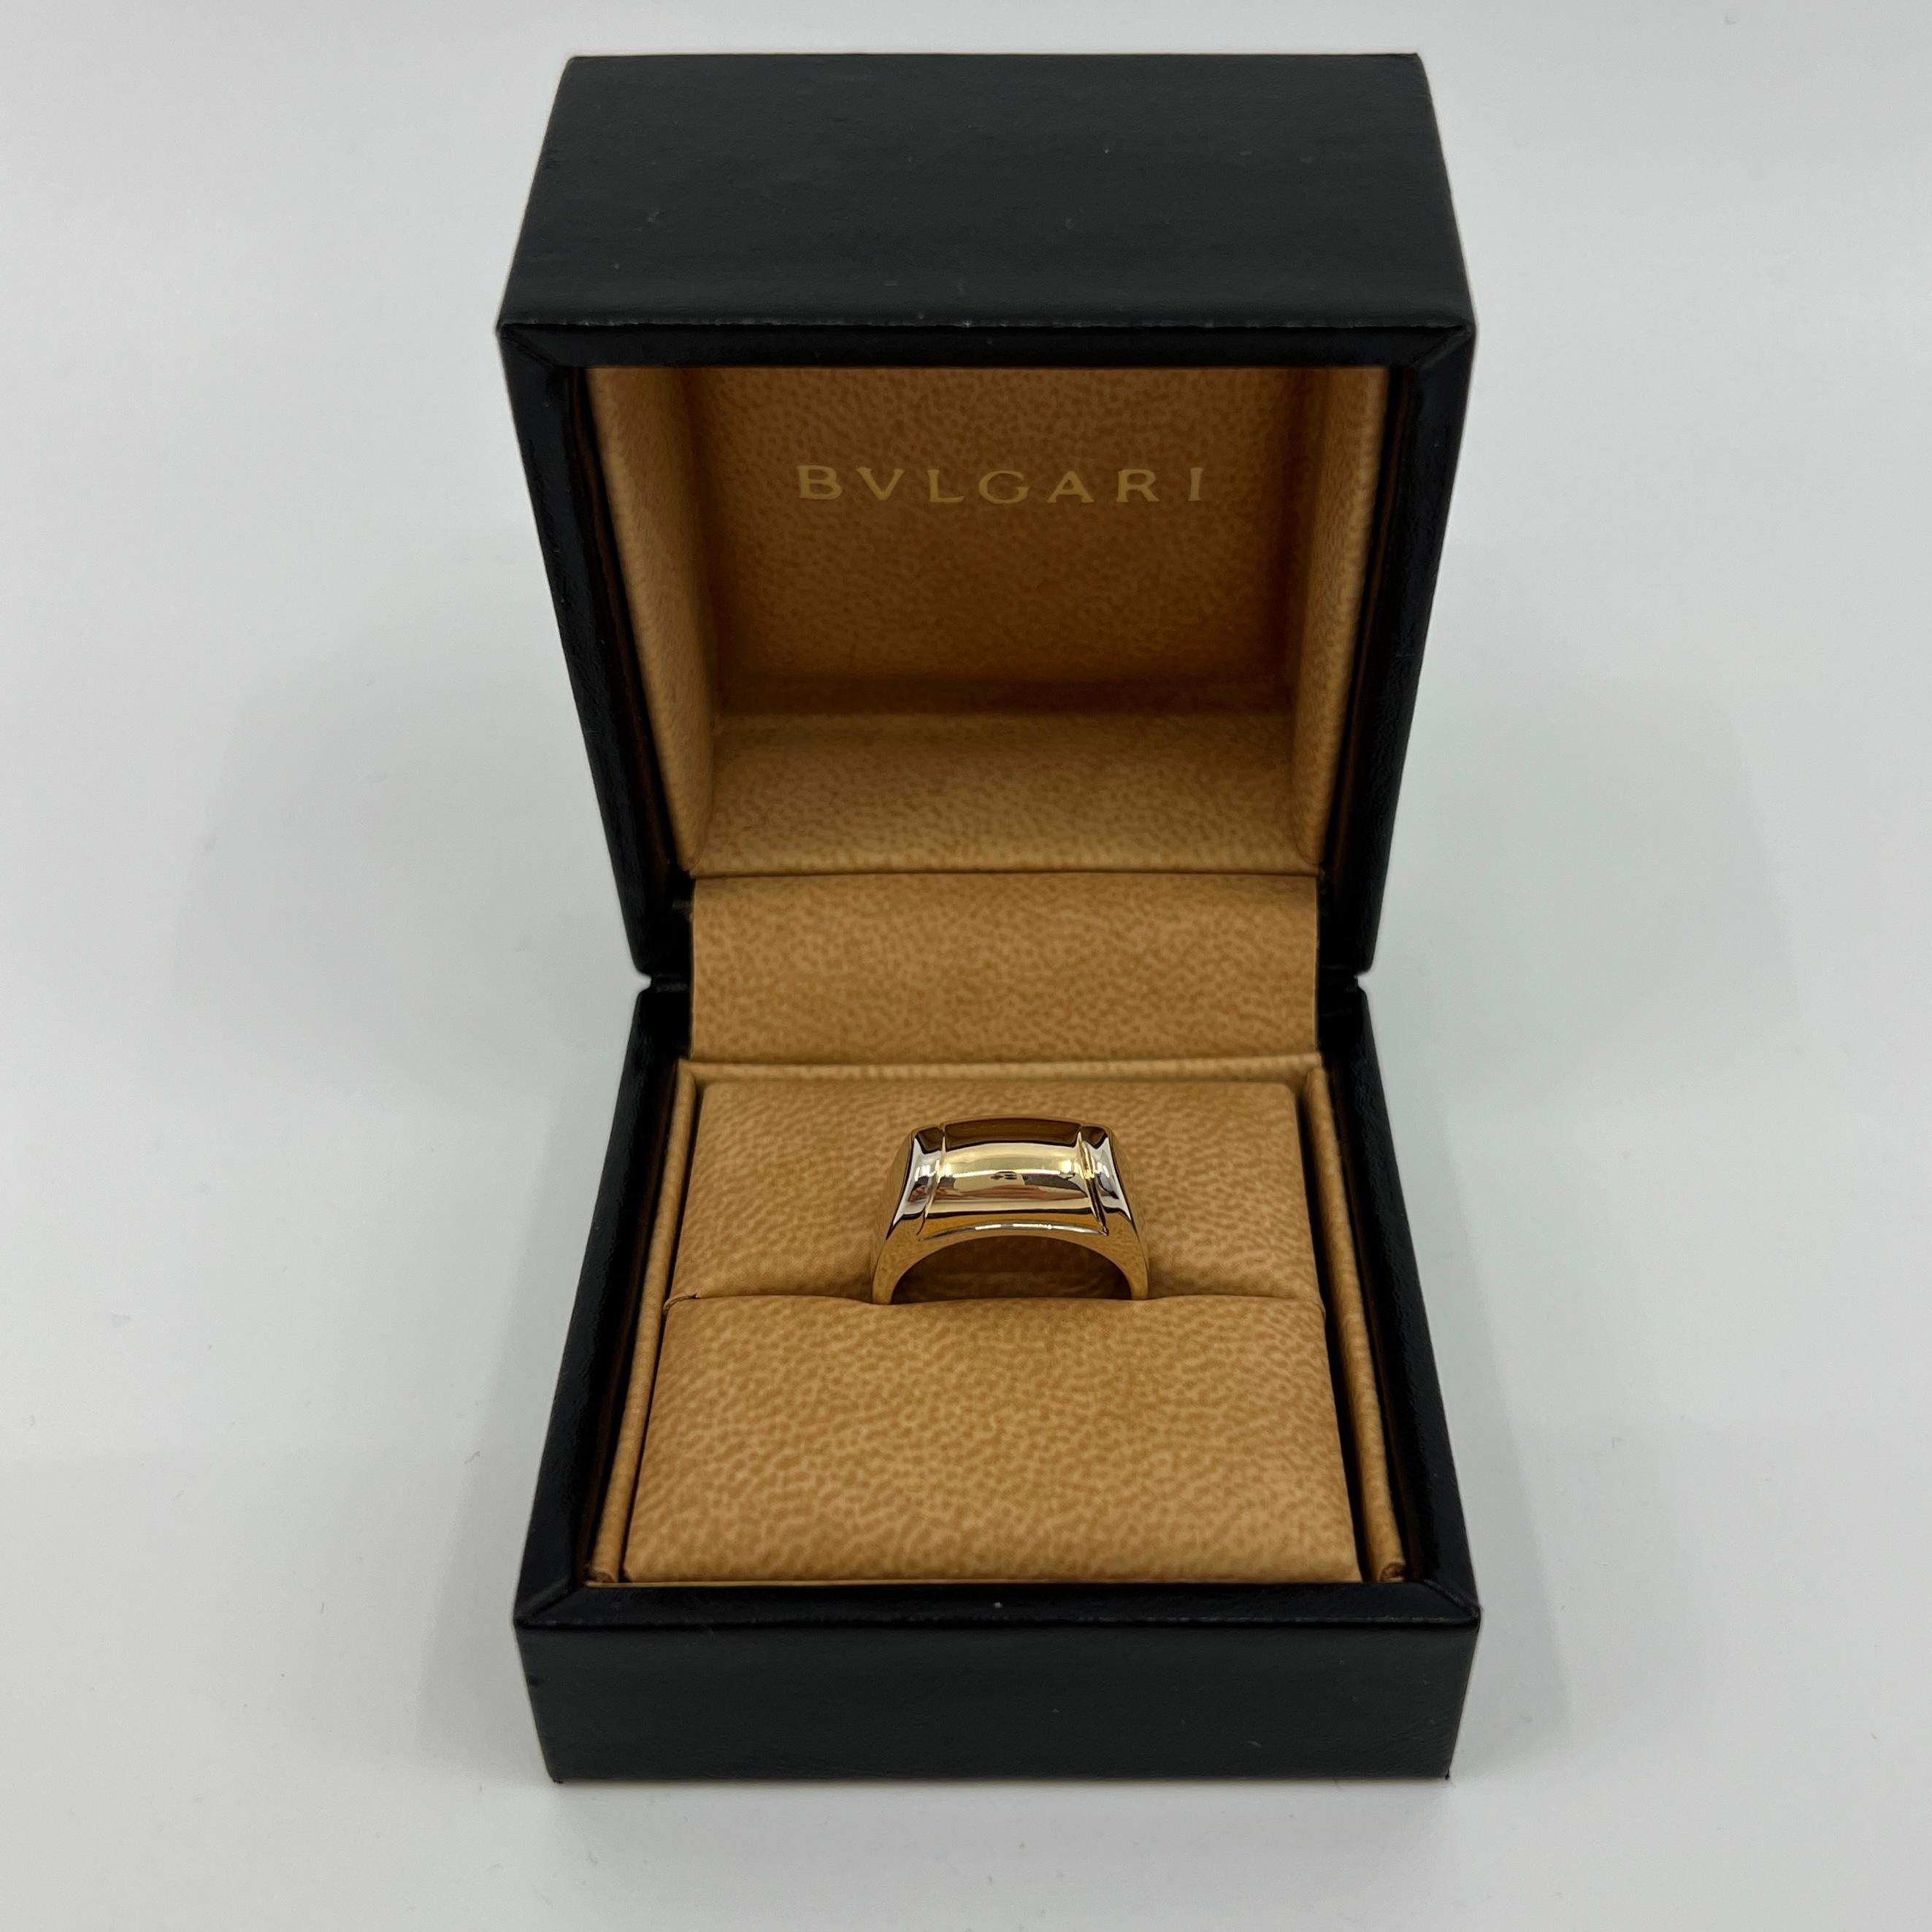 Vintage Bvlgari Yellow & White Gold Tronchetto 18k Ring.

Beautiful domed 18k yellow gold shown in a tension-style 18k white gold ring.

In excellent condition, has been professionally polished and cleaned.

Ring size: UK L - EU 51 - US 6.

Ring